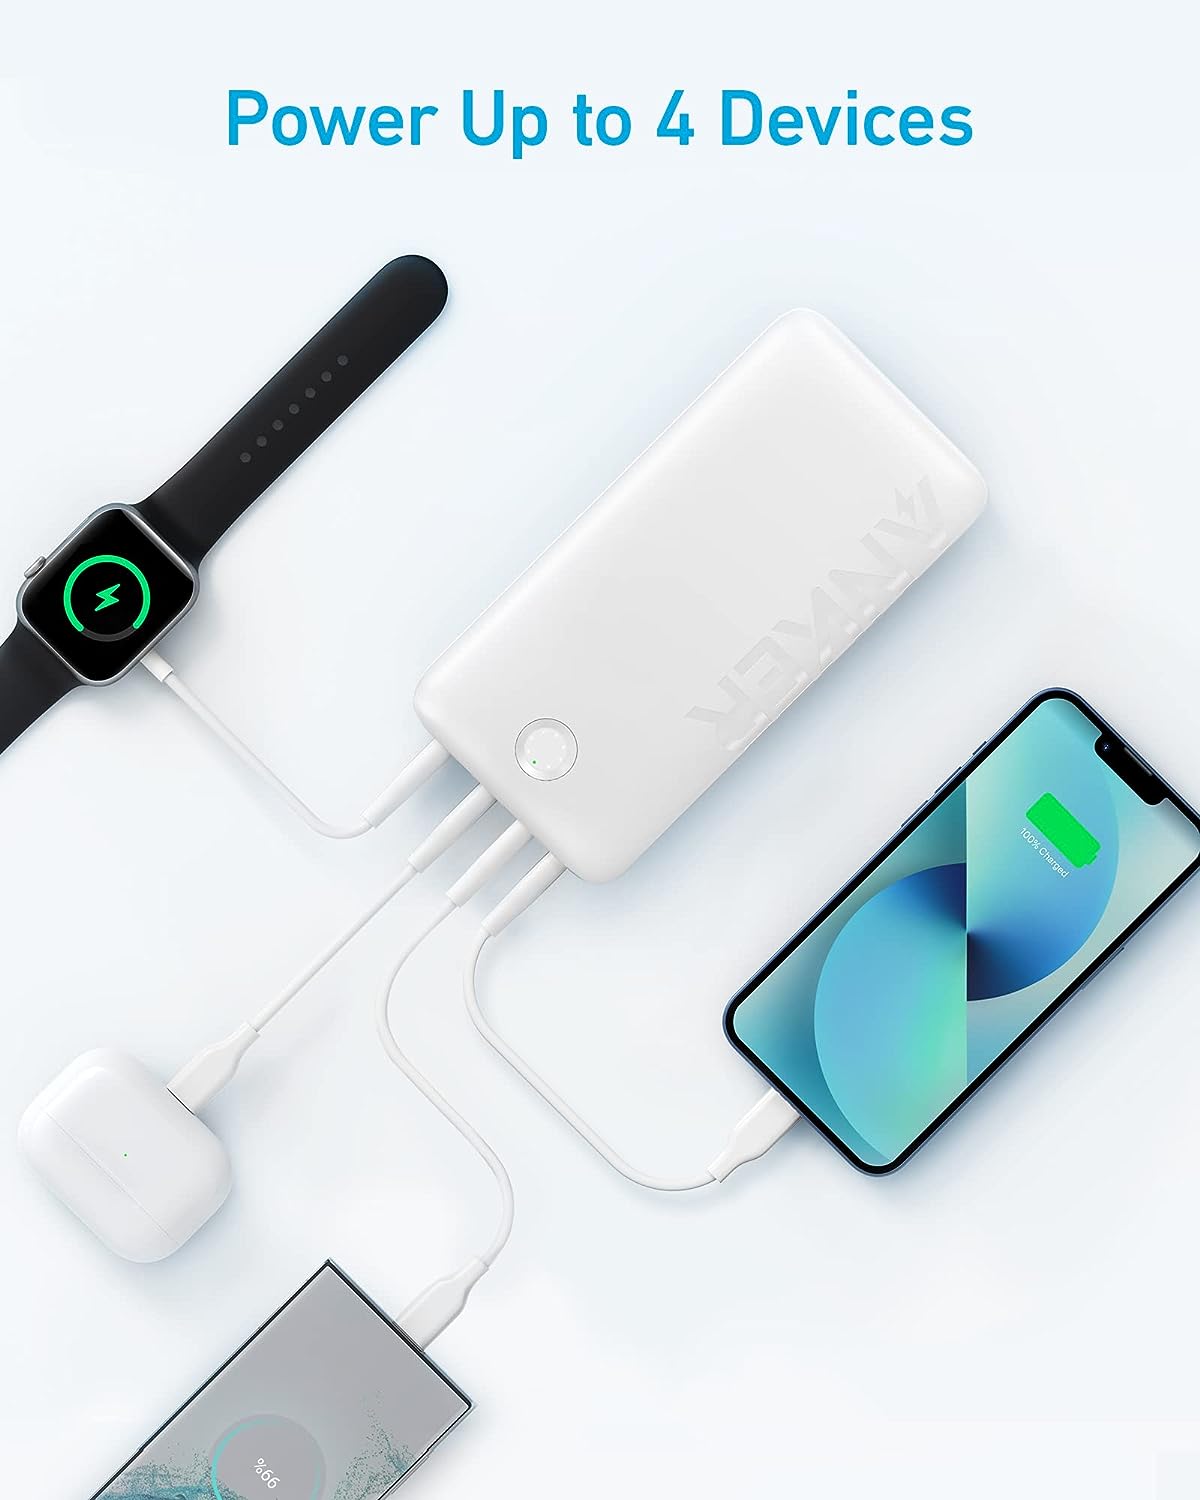 Anker Portable Charger, Power Bank, 40,000mAh 30W Battery Pack with USB-C High-Speed Charging